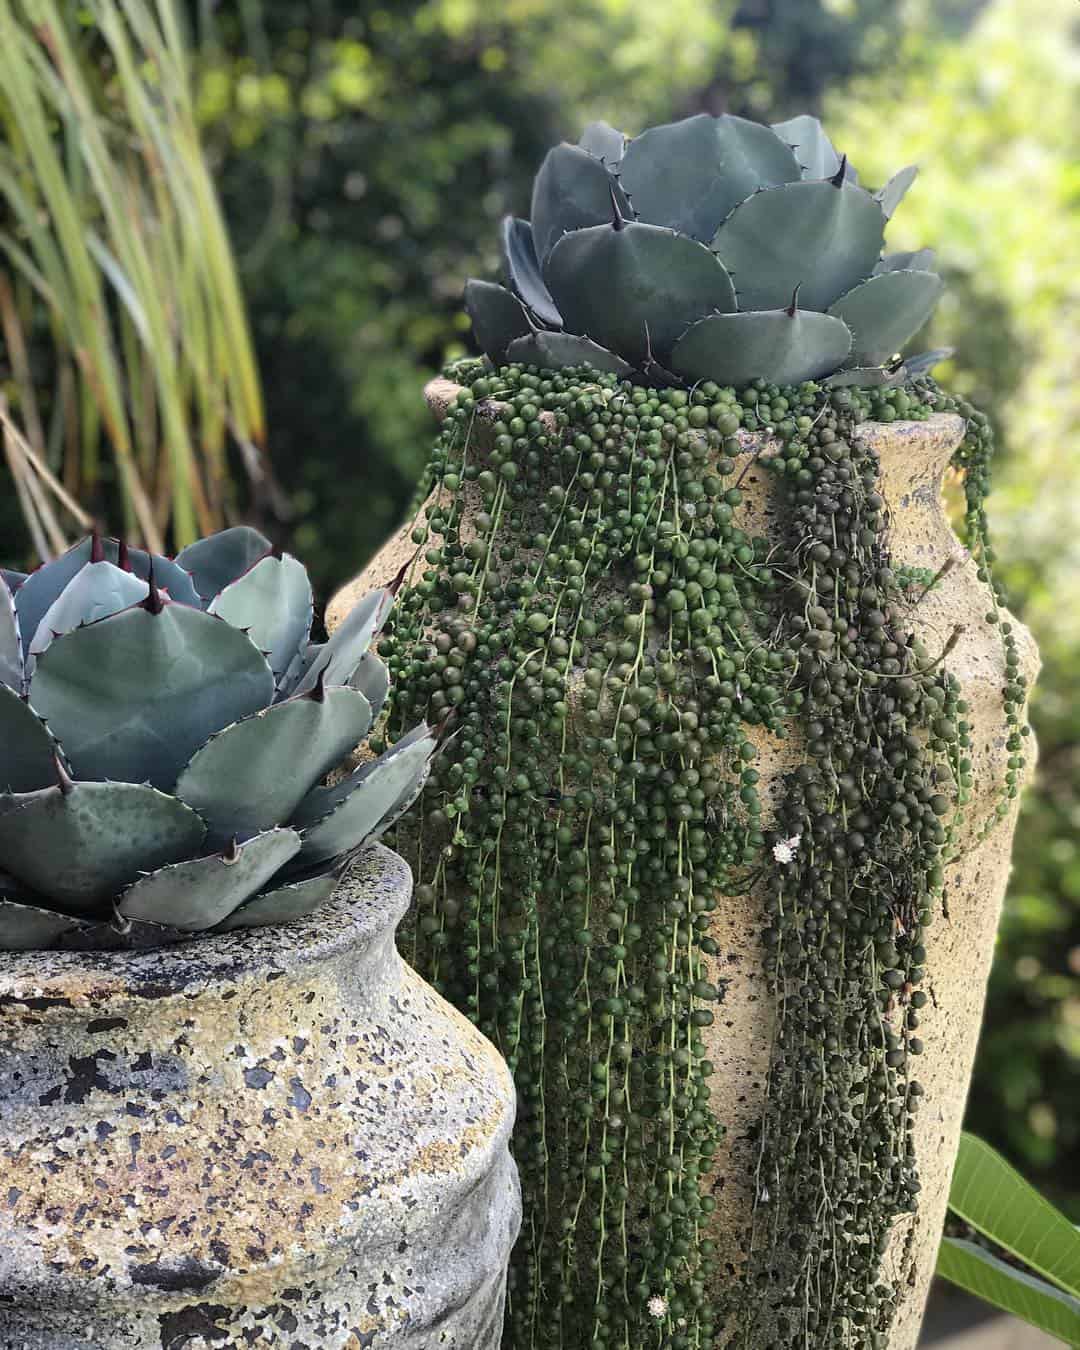 Two large, weathered pots overflowing with plants are pictured. The pot in the foreground contains a blue-green agave plant, while the pot in the background has a similar agave plant and long, trailing strings of small, round green succulent beads that make a gardener’s heart skip a beat.